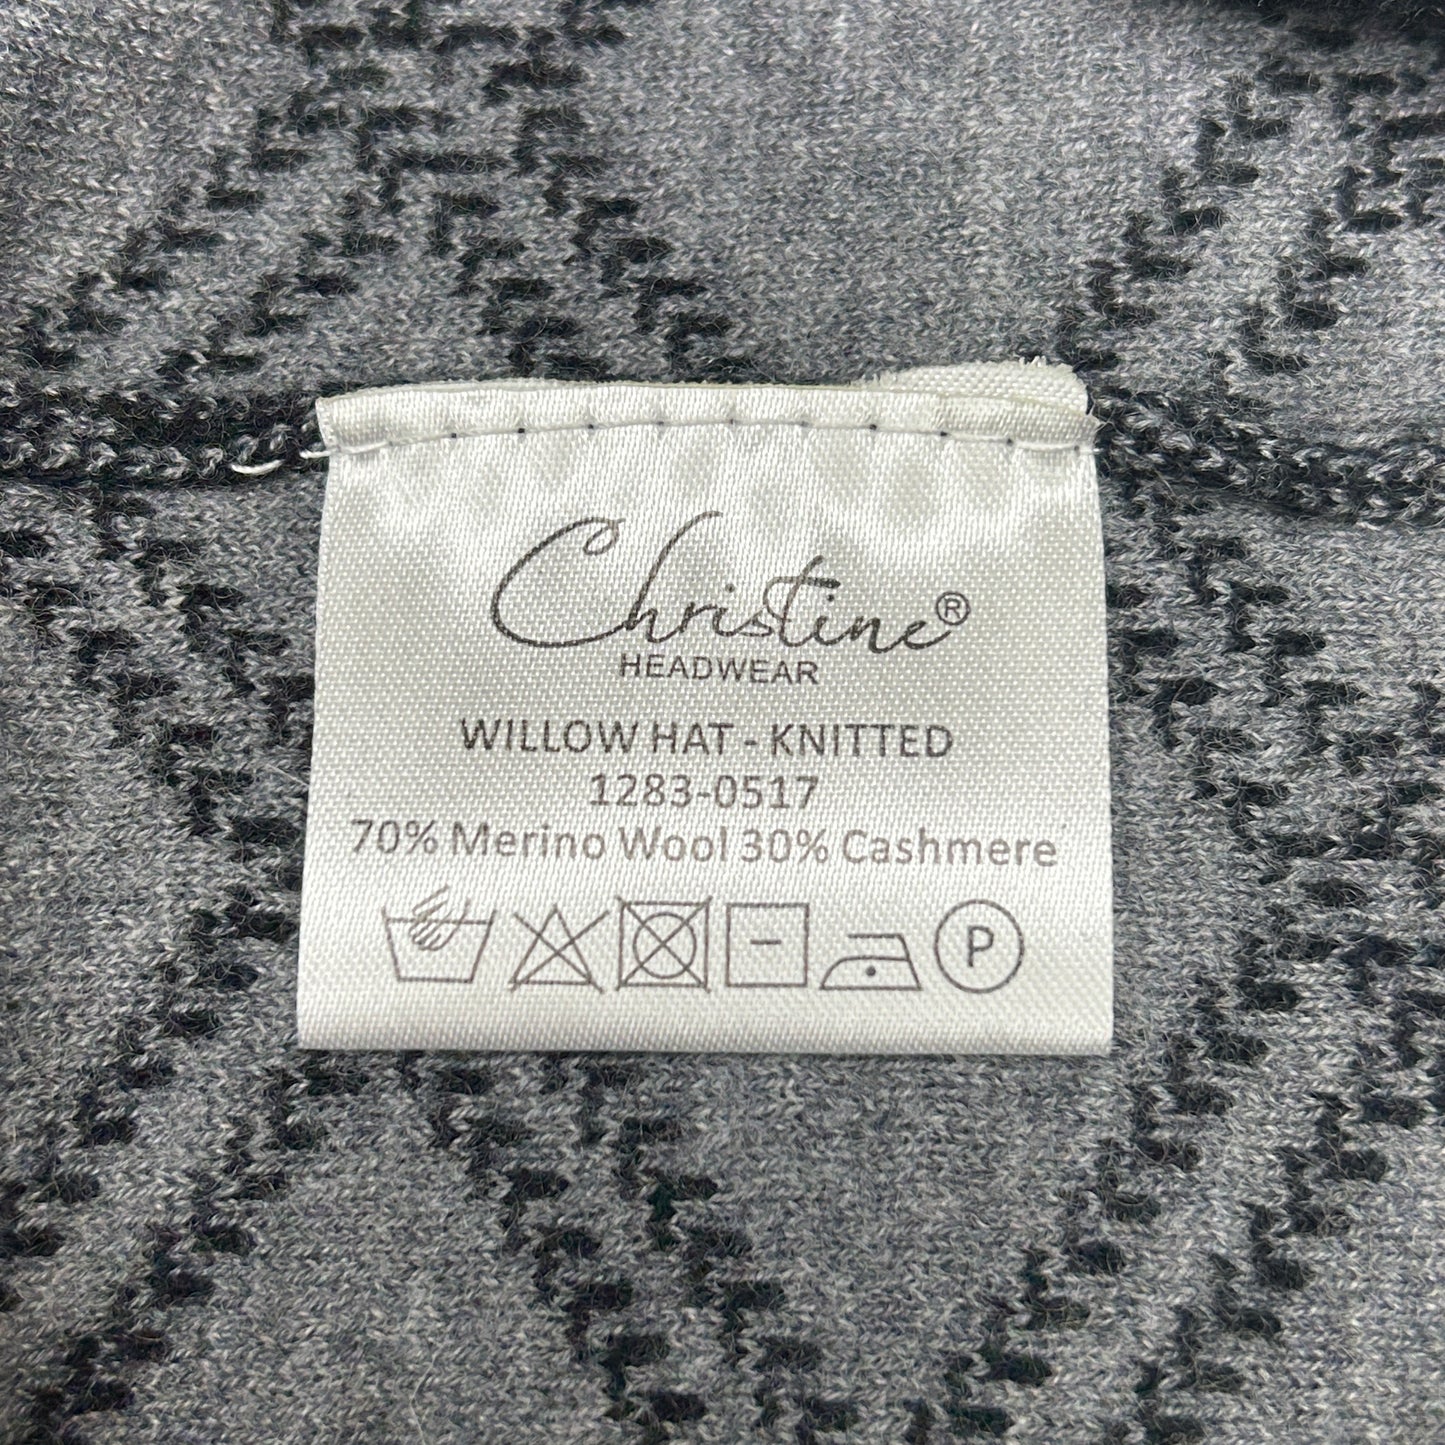 CHRISTINE HEADWEAR Willow Hat Knitted Mid Grey/Black 1283-0517 (New)